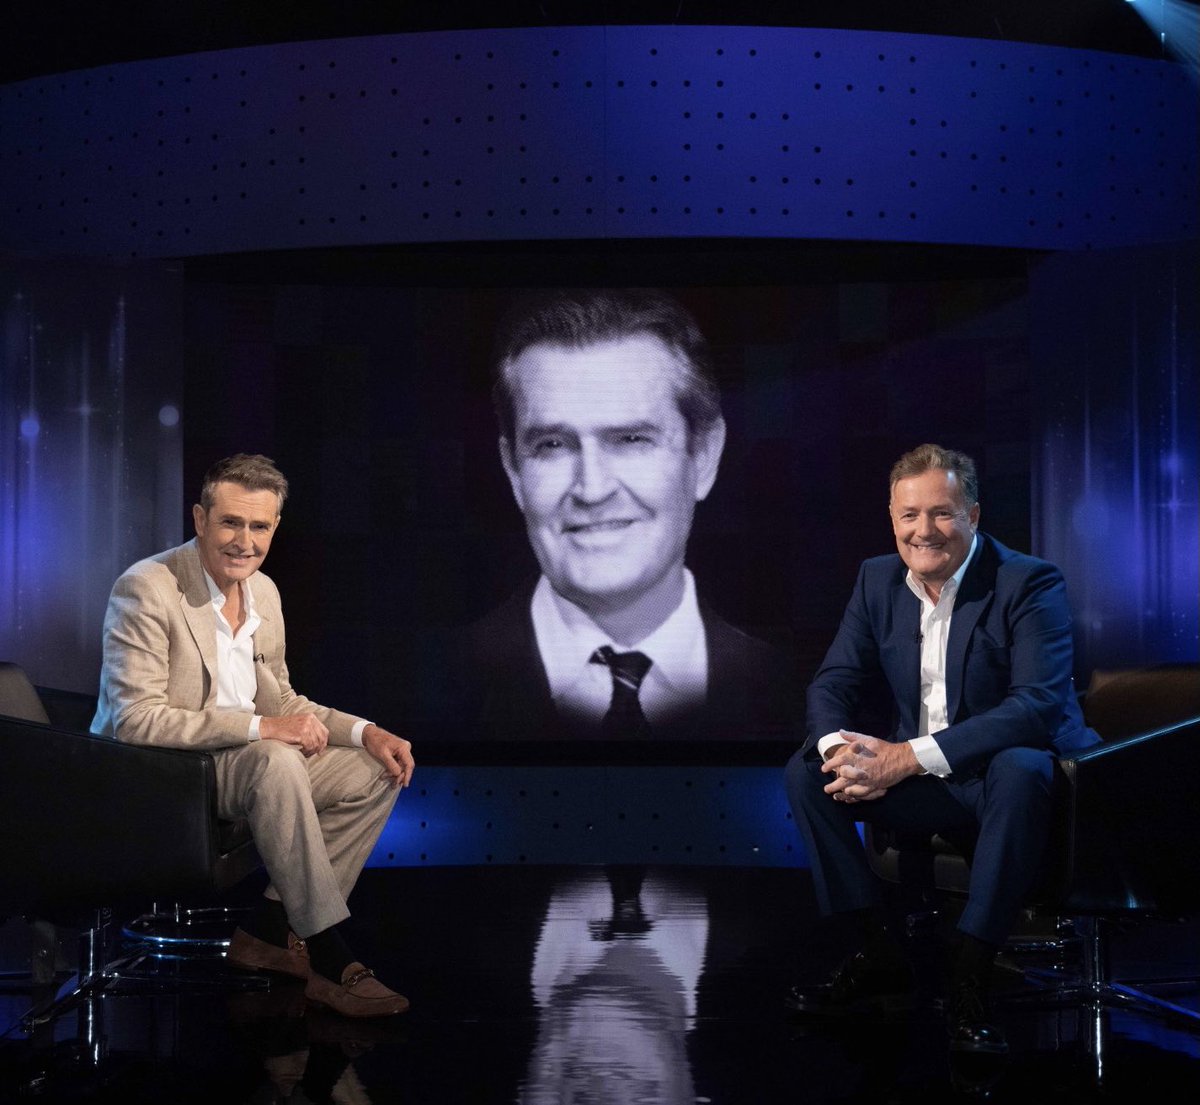 My Life Stories show last night with Rupert Everett won the 9pm ratings slot for the first time in this series, beating Gordon Ramsay's Bank Balance on BBC1.
Thanks for watching, and thanks for a cracking interview Rupert! https://t.co/lbRljoq6rD